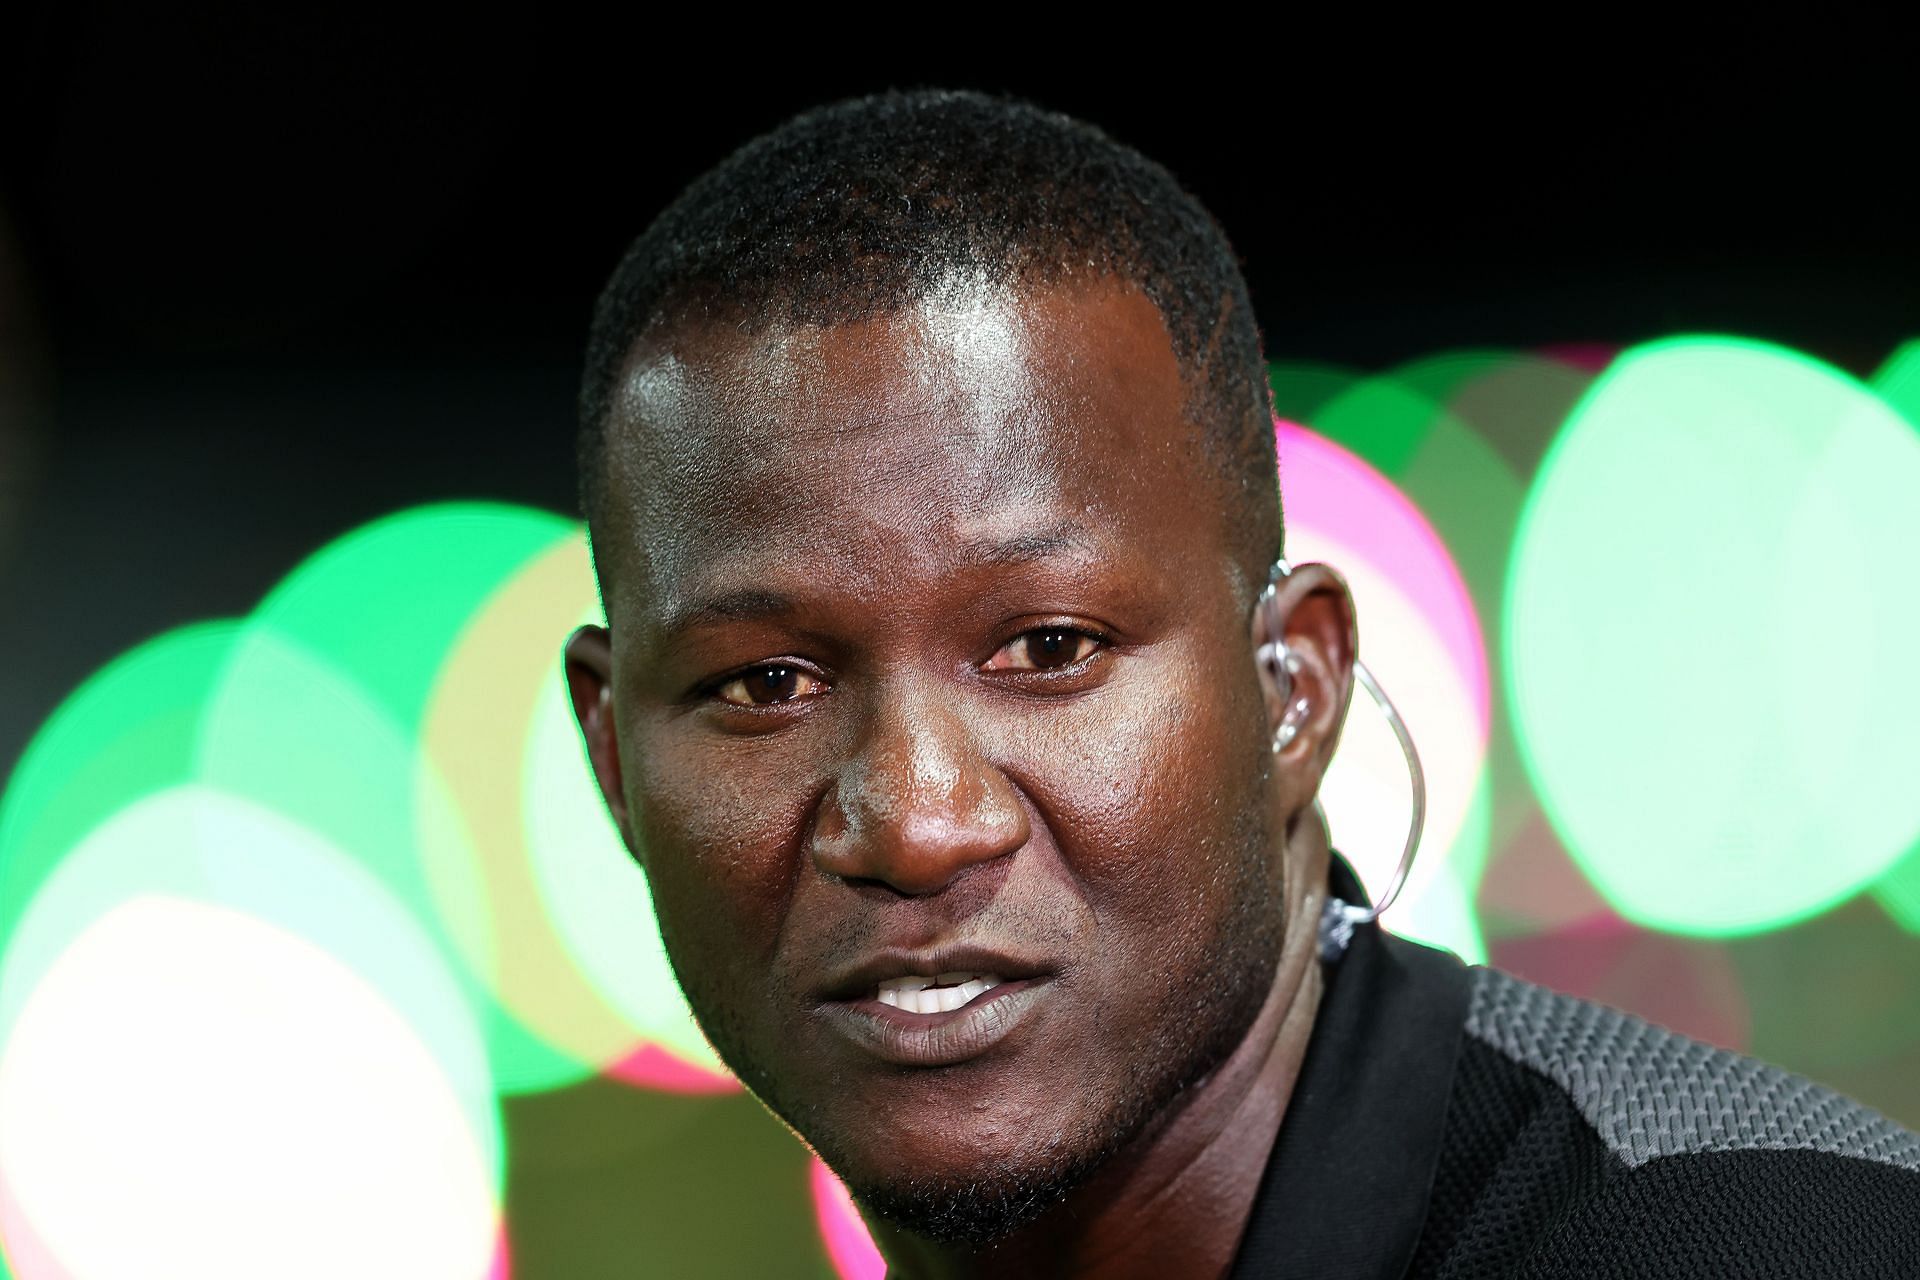 Darren Sammy is the most successful captain in T20 World Cups. (Credits: Getty)